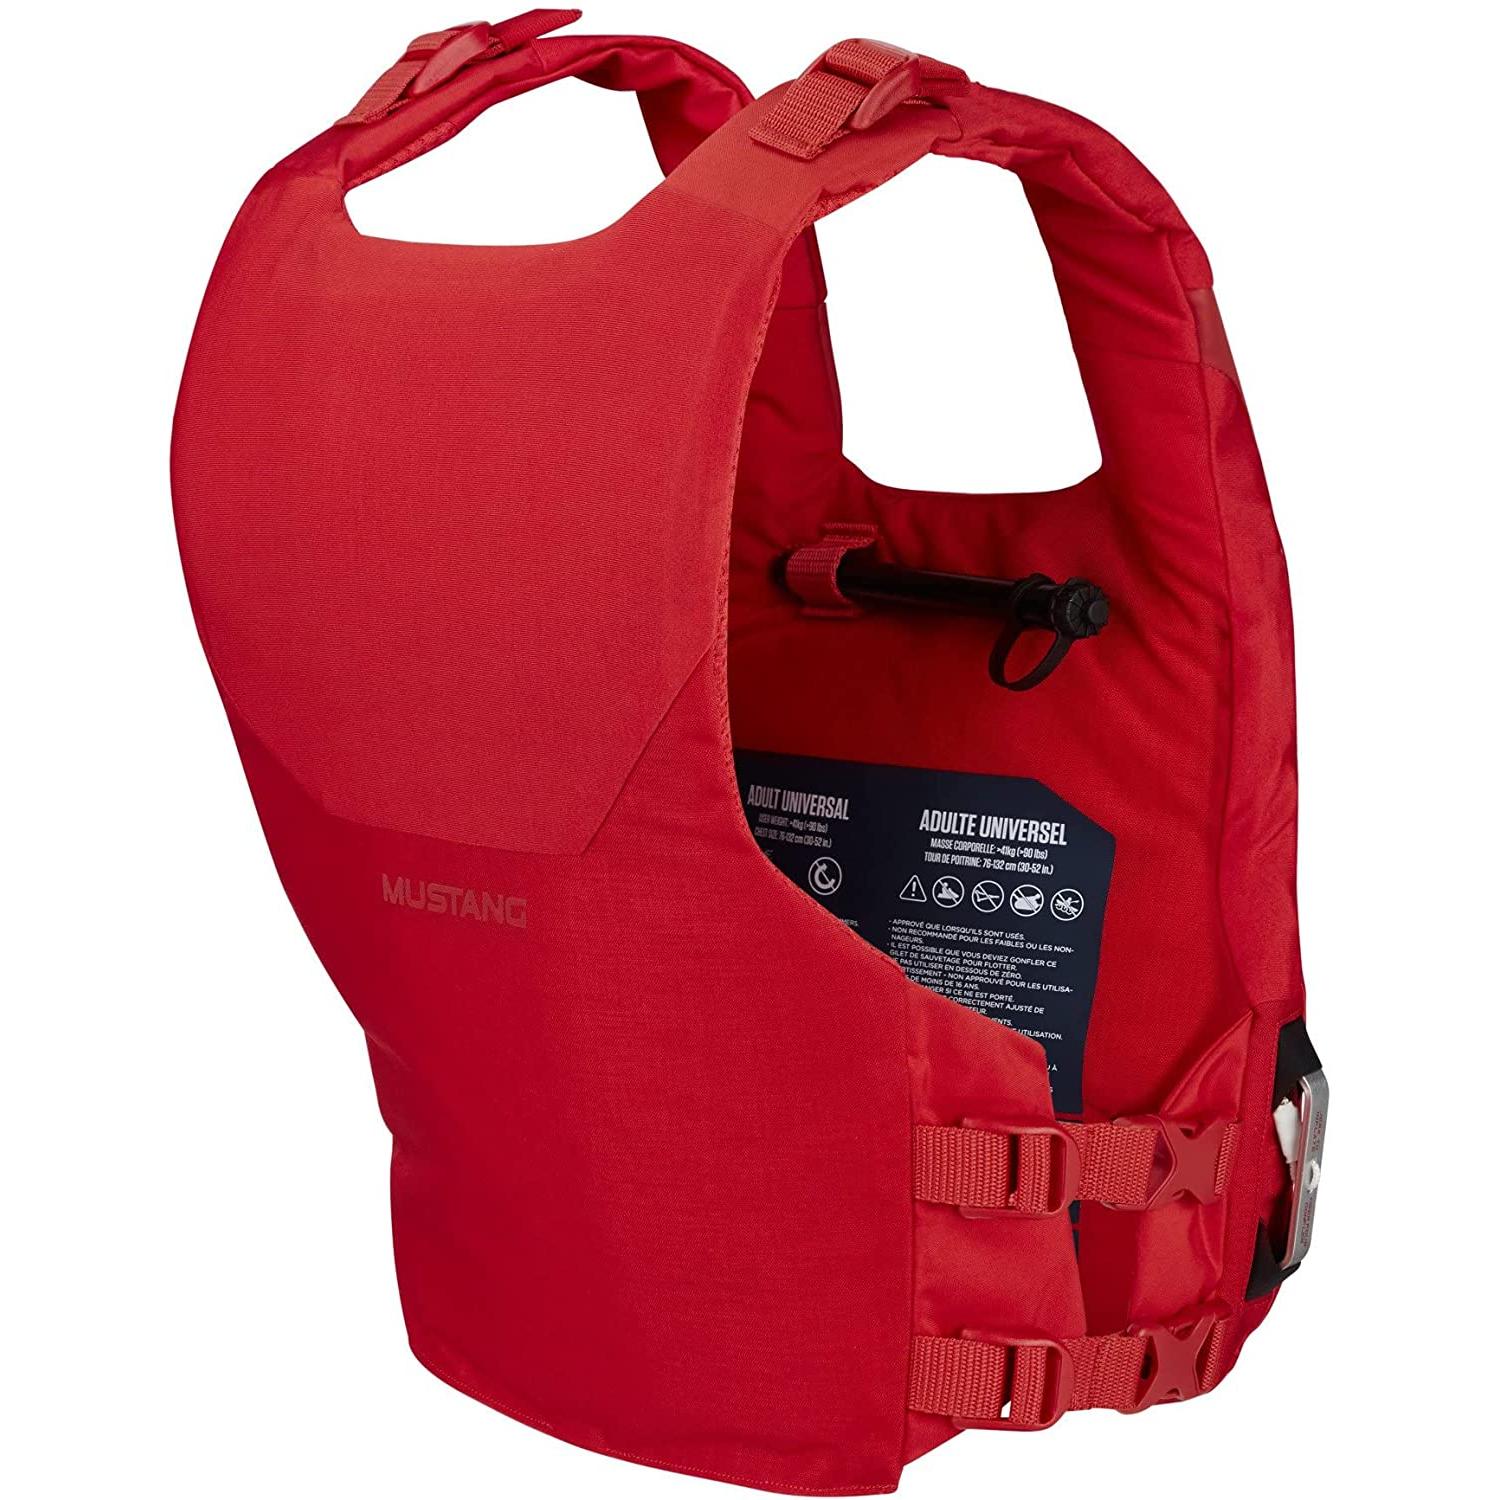 Mustang Survival - Khimera Dual Flotation PFD for Adults (One Size Fits All) Slim Profile, Option to Boost Buoyancy, Excellent for Paddlers and Sailors